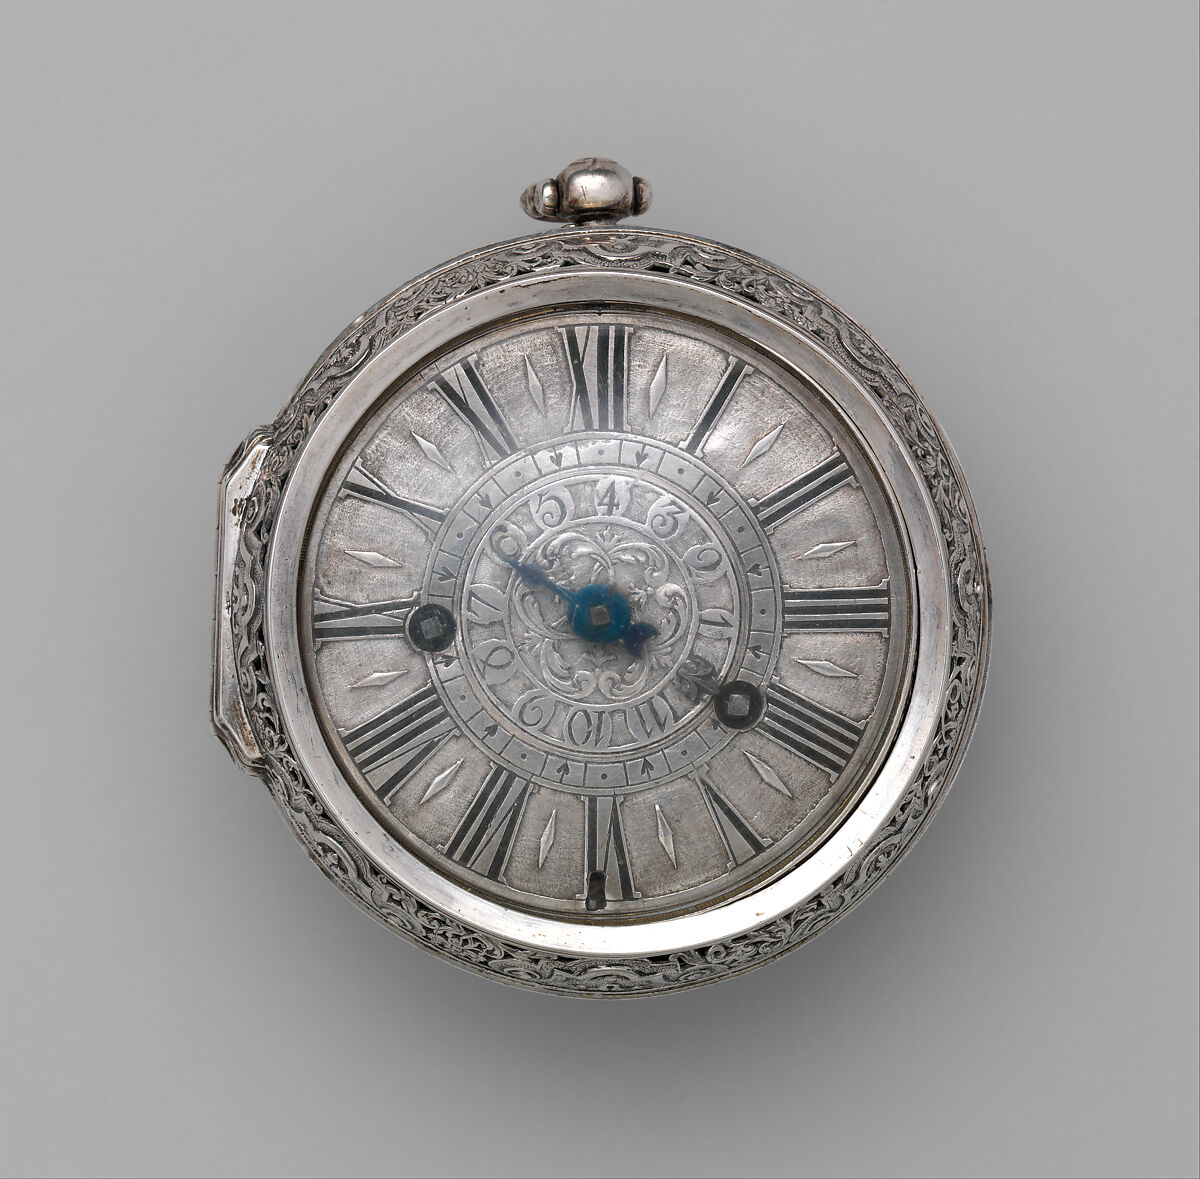 Pair-case watch, Case maker: Probably Adam Roumeau (working 1687, died before 1698), Case and dial: silver with blued-steel hand; movement: brass and steel, British, London 